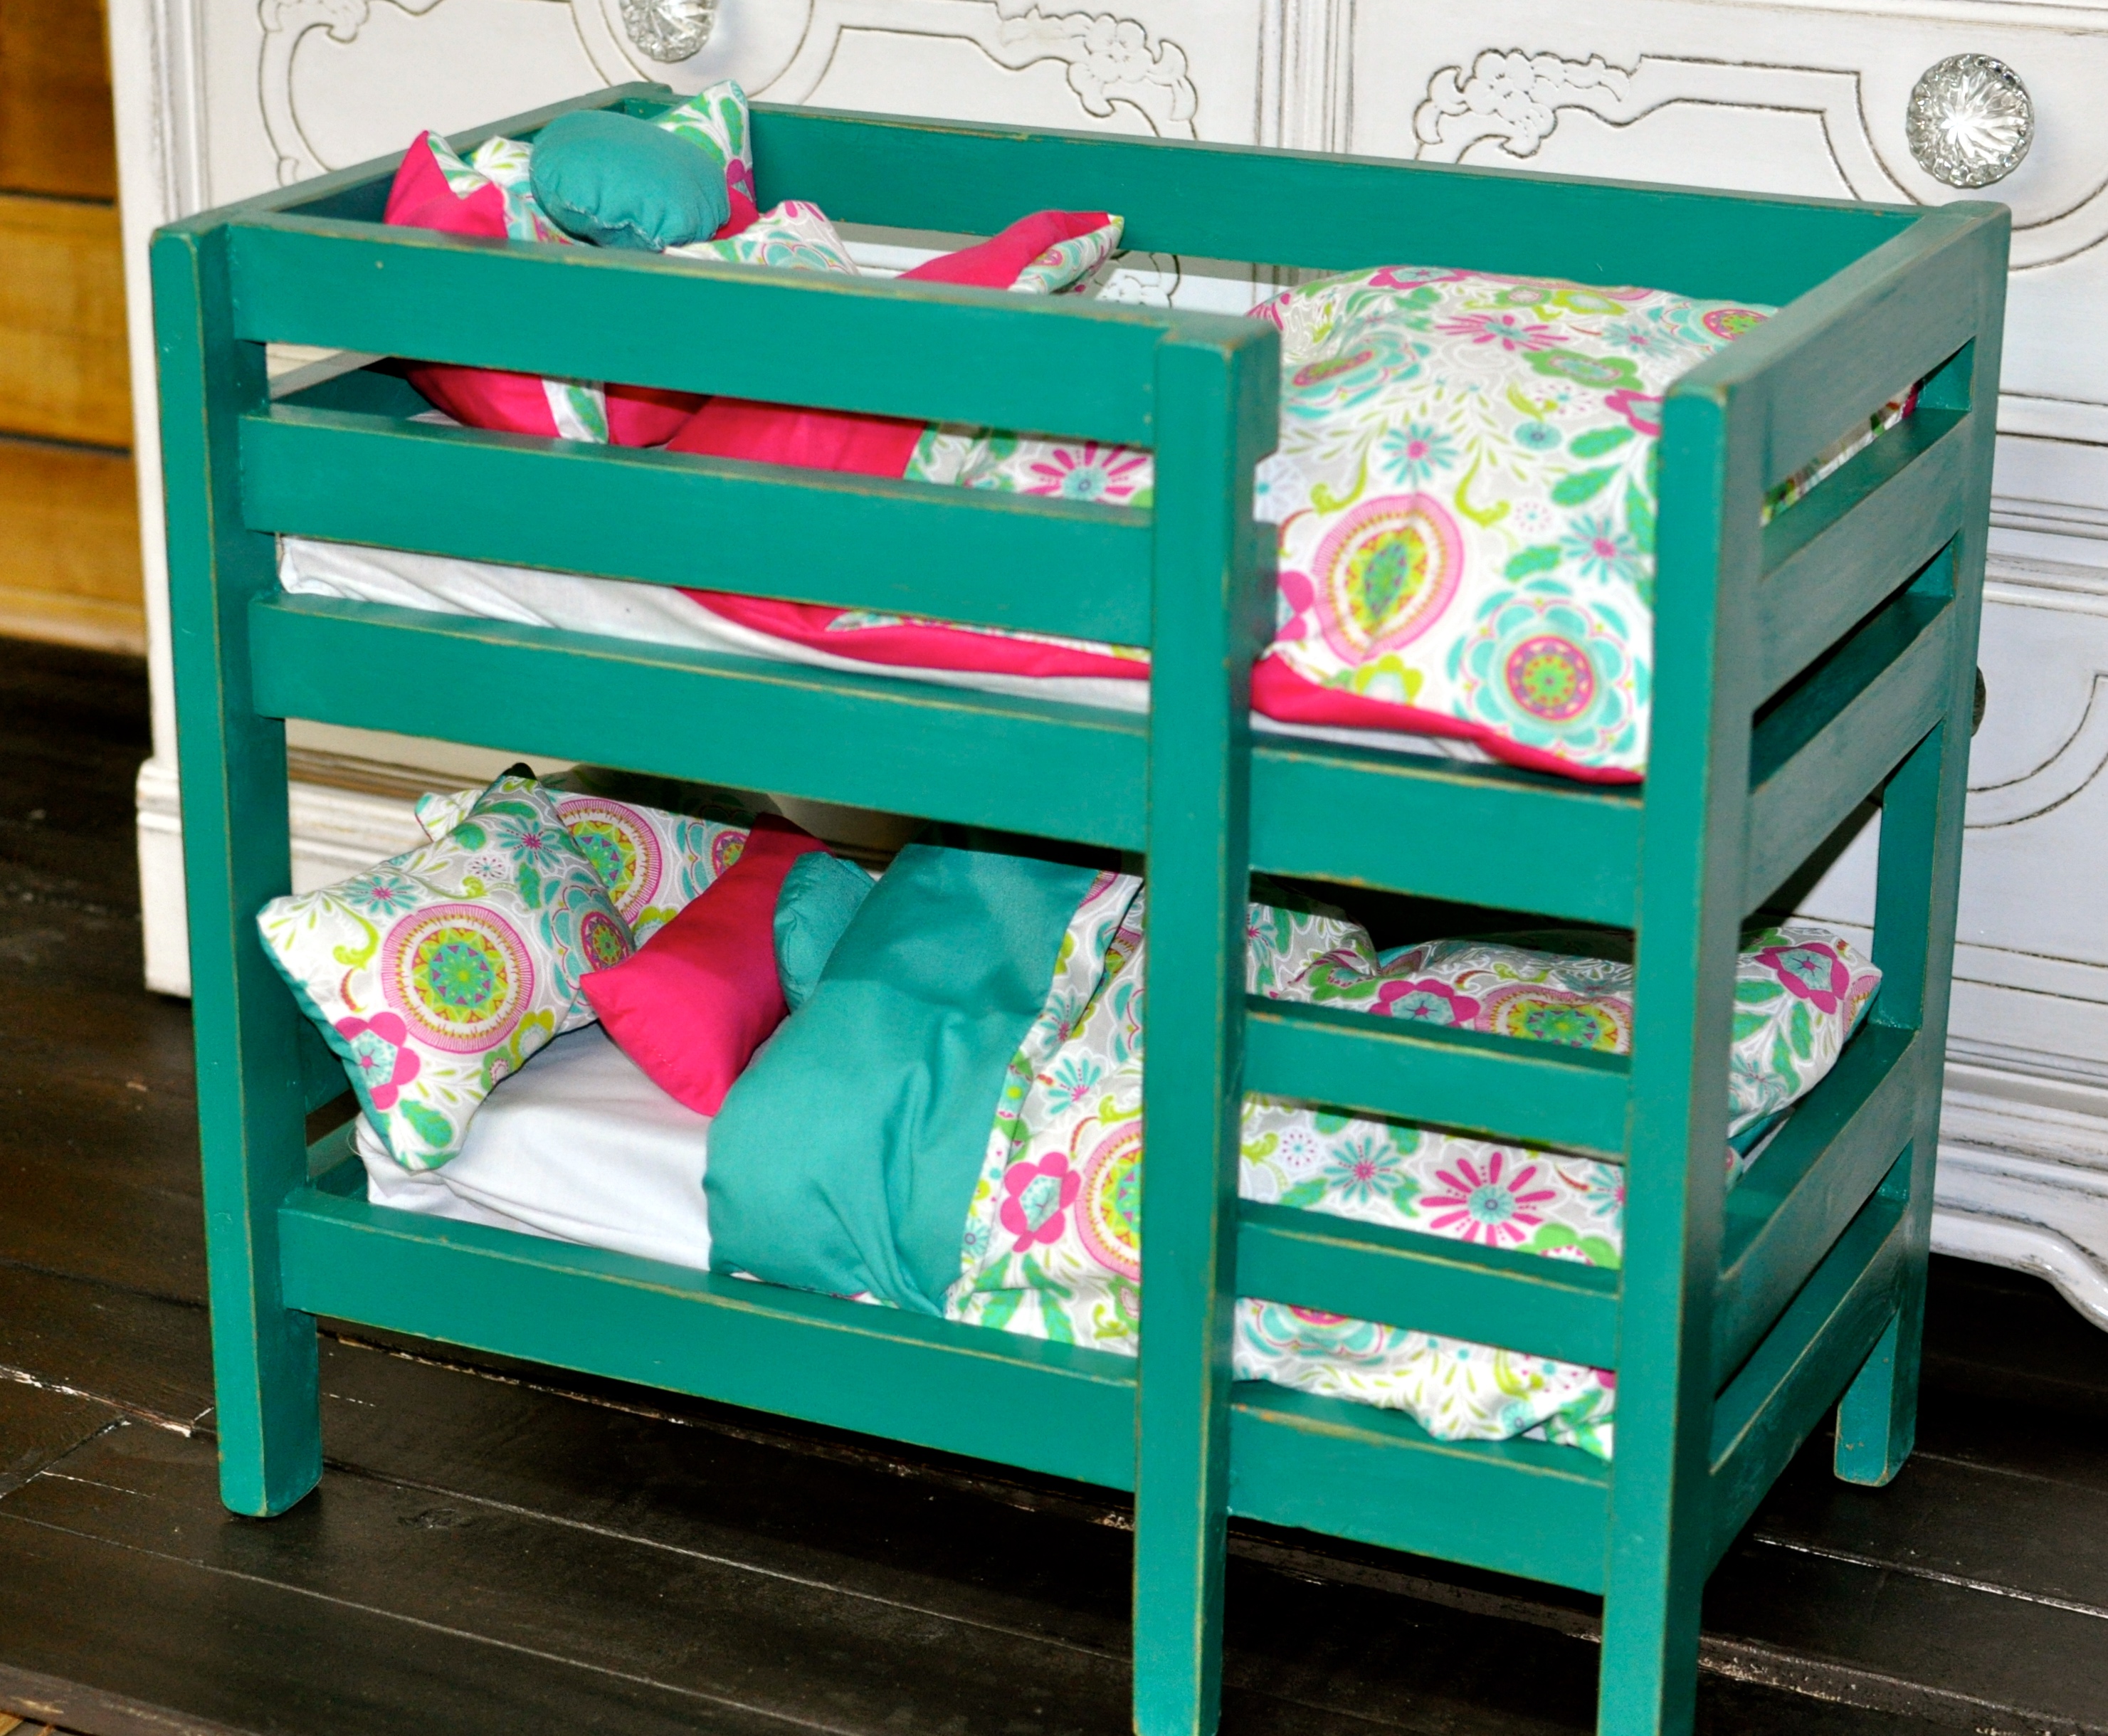 ag doll bunk bed